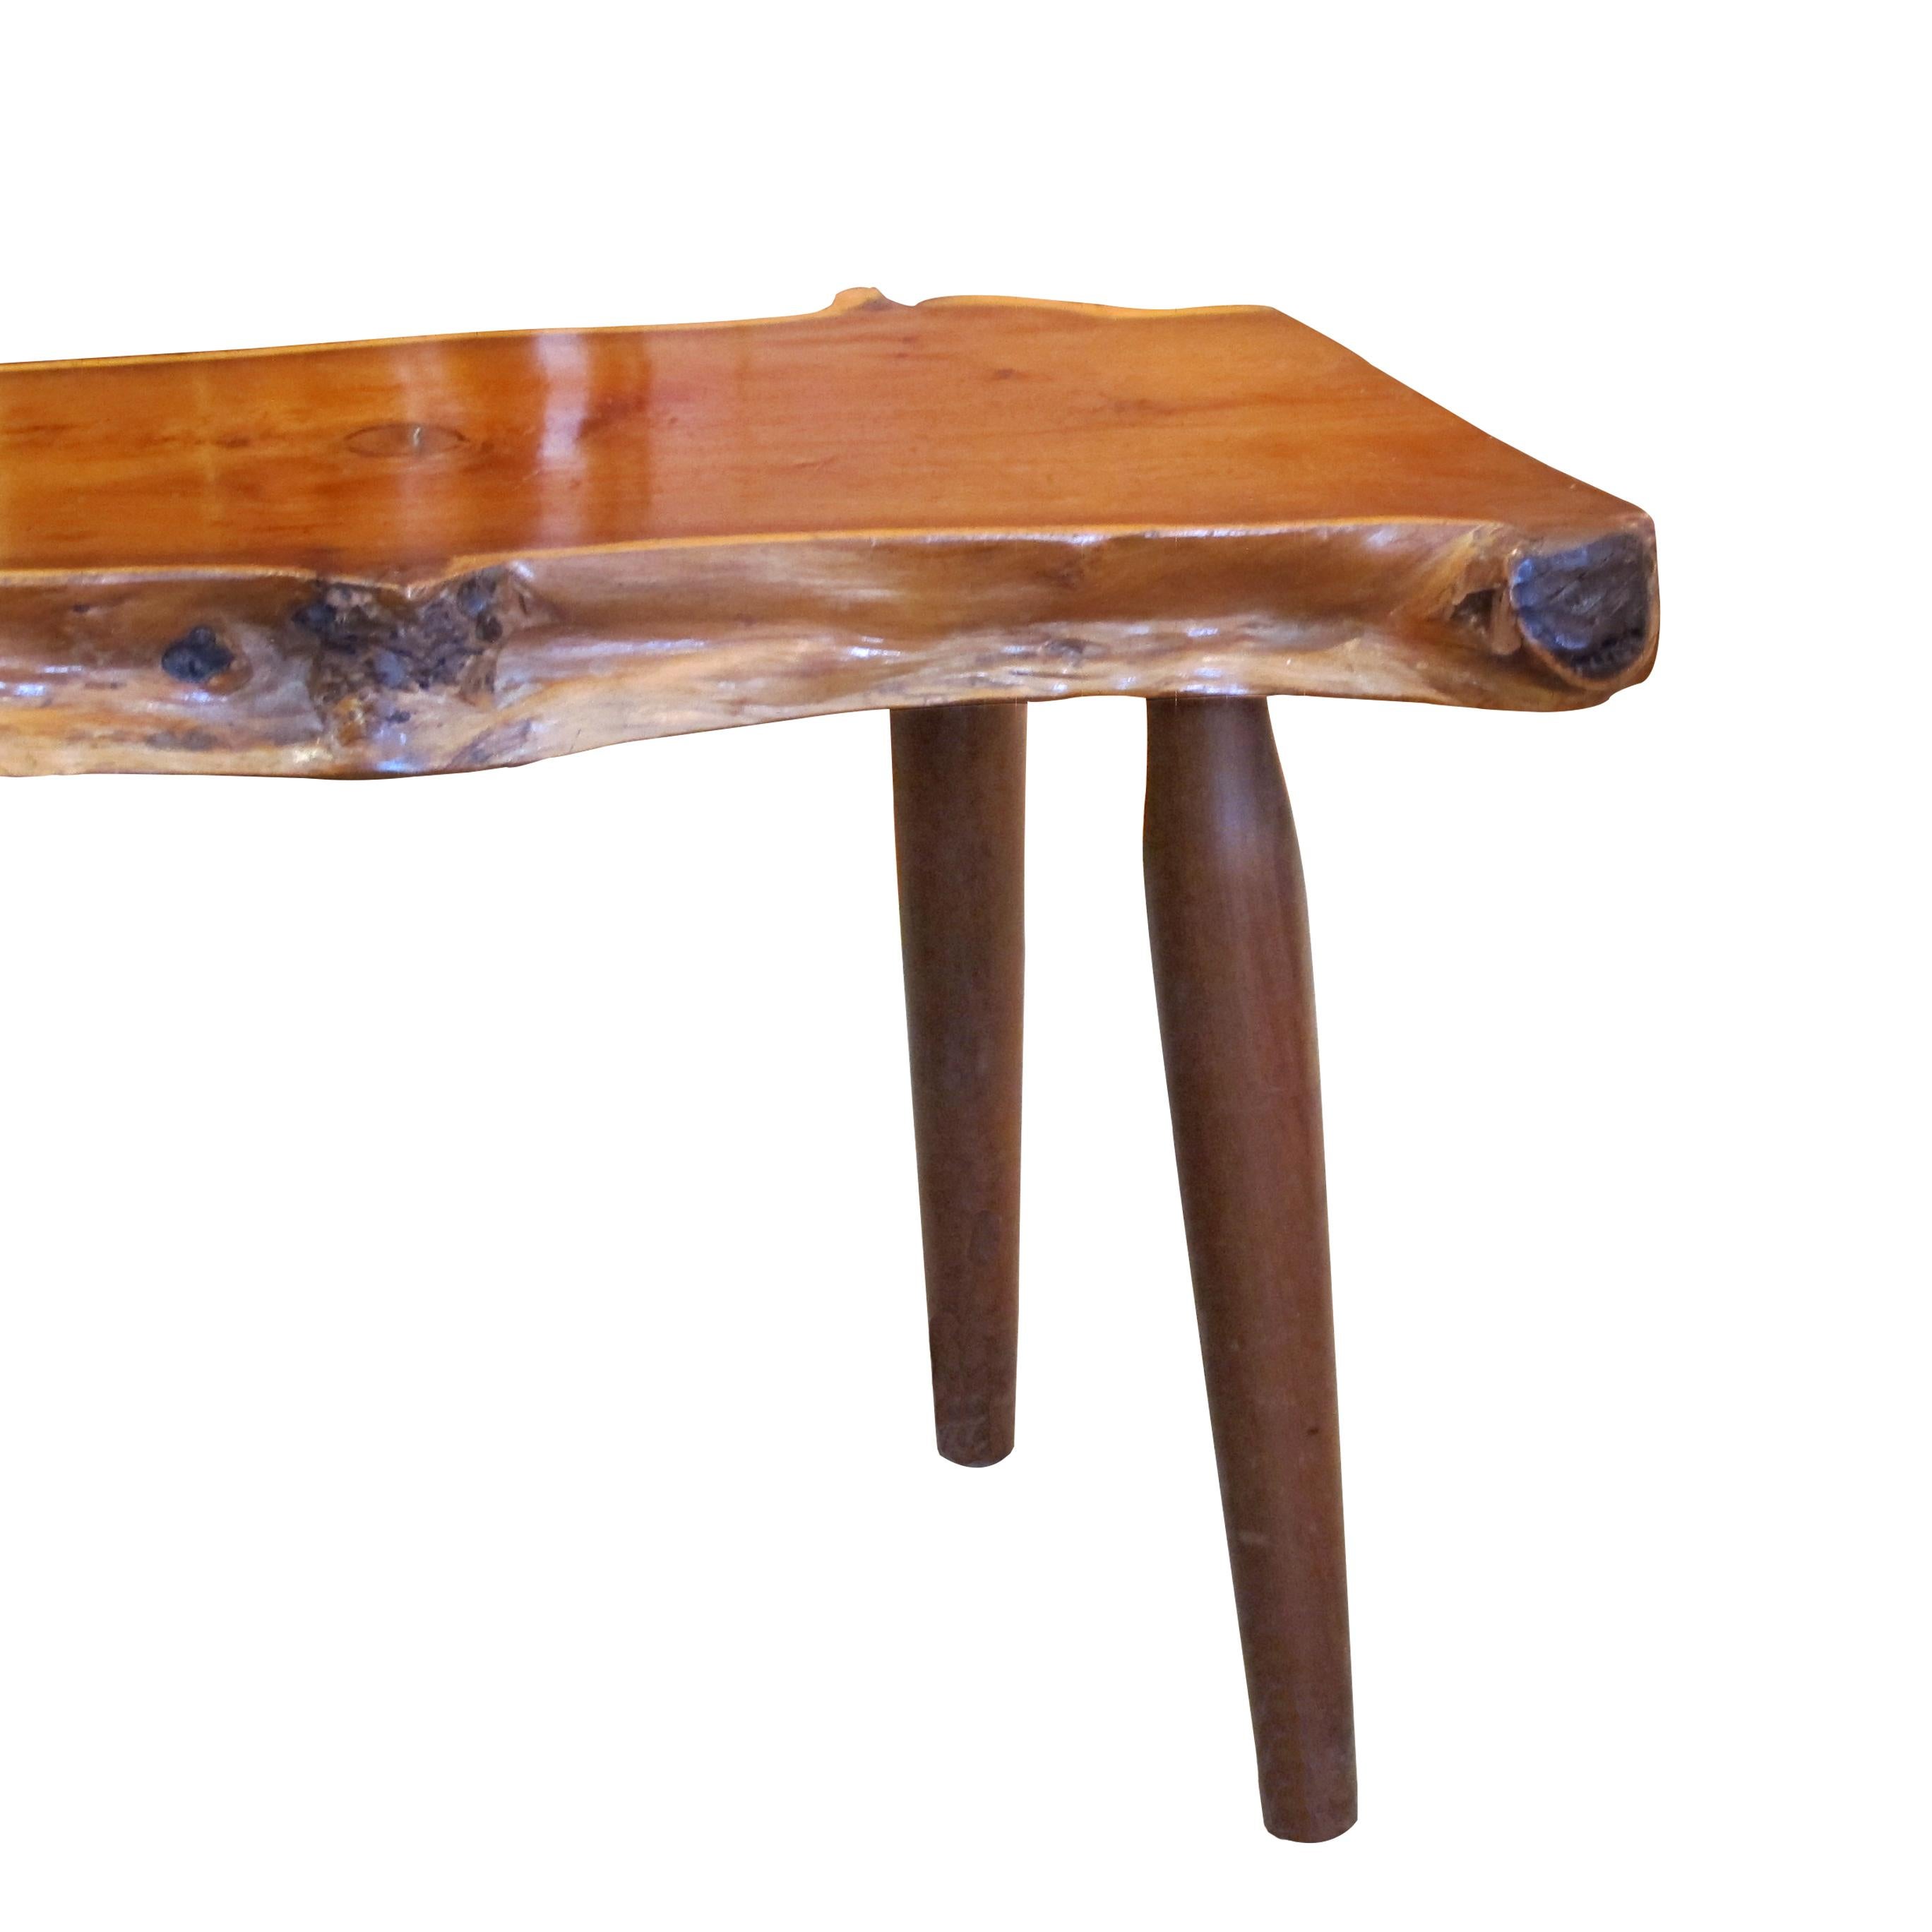 1960s Live Edge Yew Wood Bench Attributed to Reynolds Of Ludlow, English For Sale 2